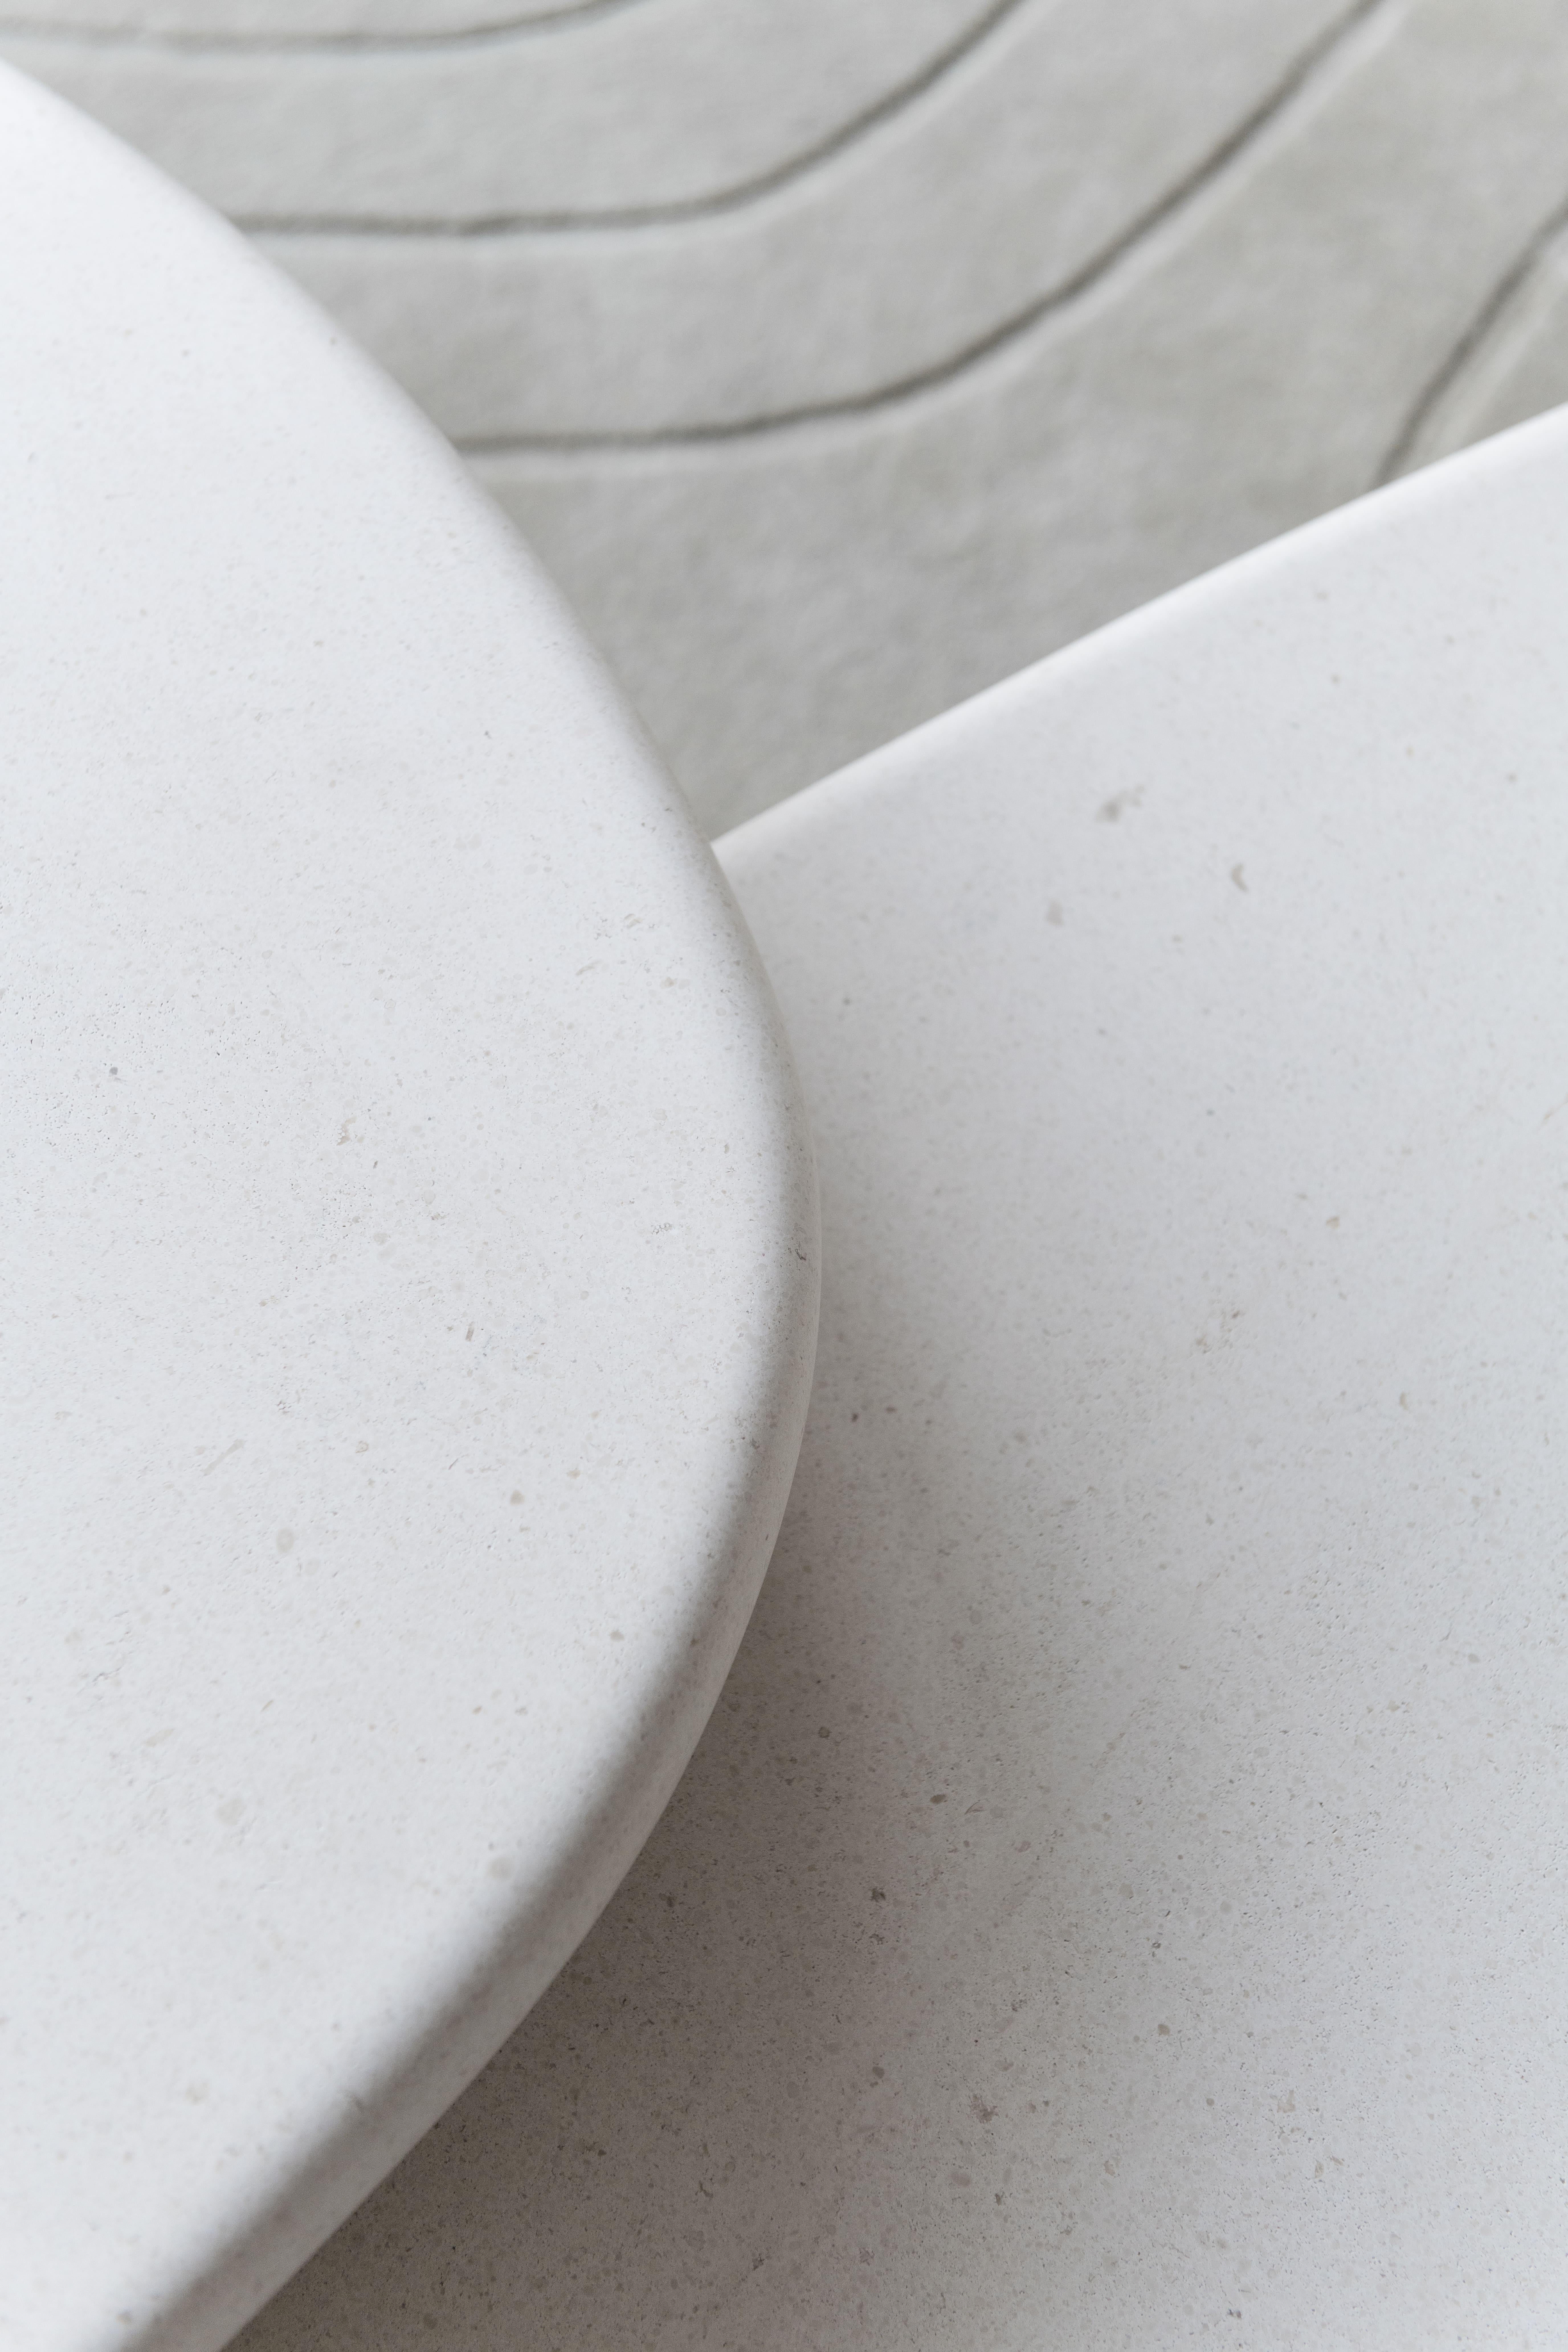 Born from the desire to turn a rigid material into a delicate, soft form, the set of coffee tables are hand-crafted entirely in capri limestone. The table tops have complementing irregular shapes and delicate tapered edges. Depending on their